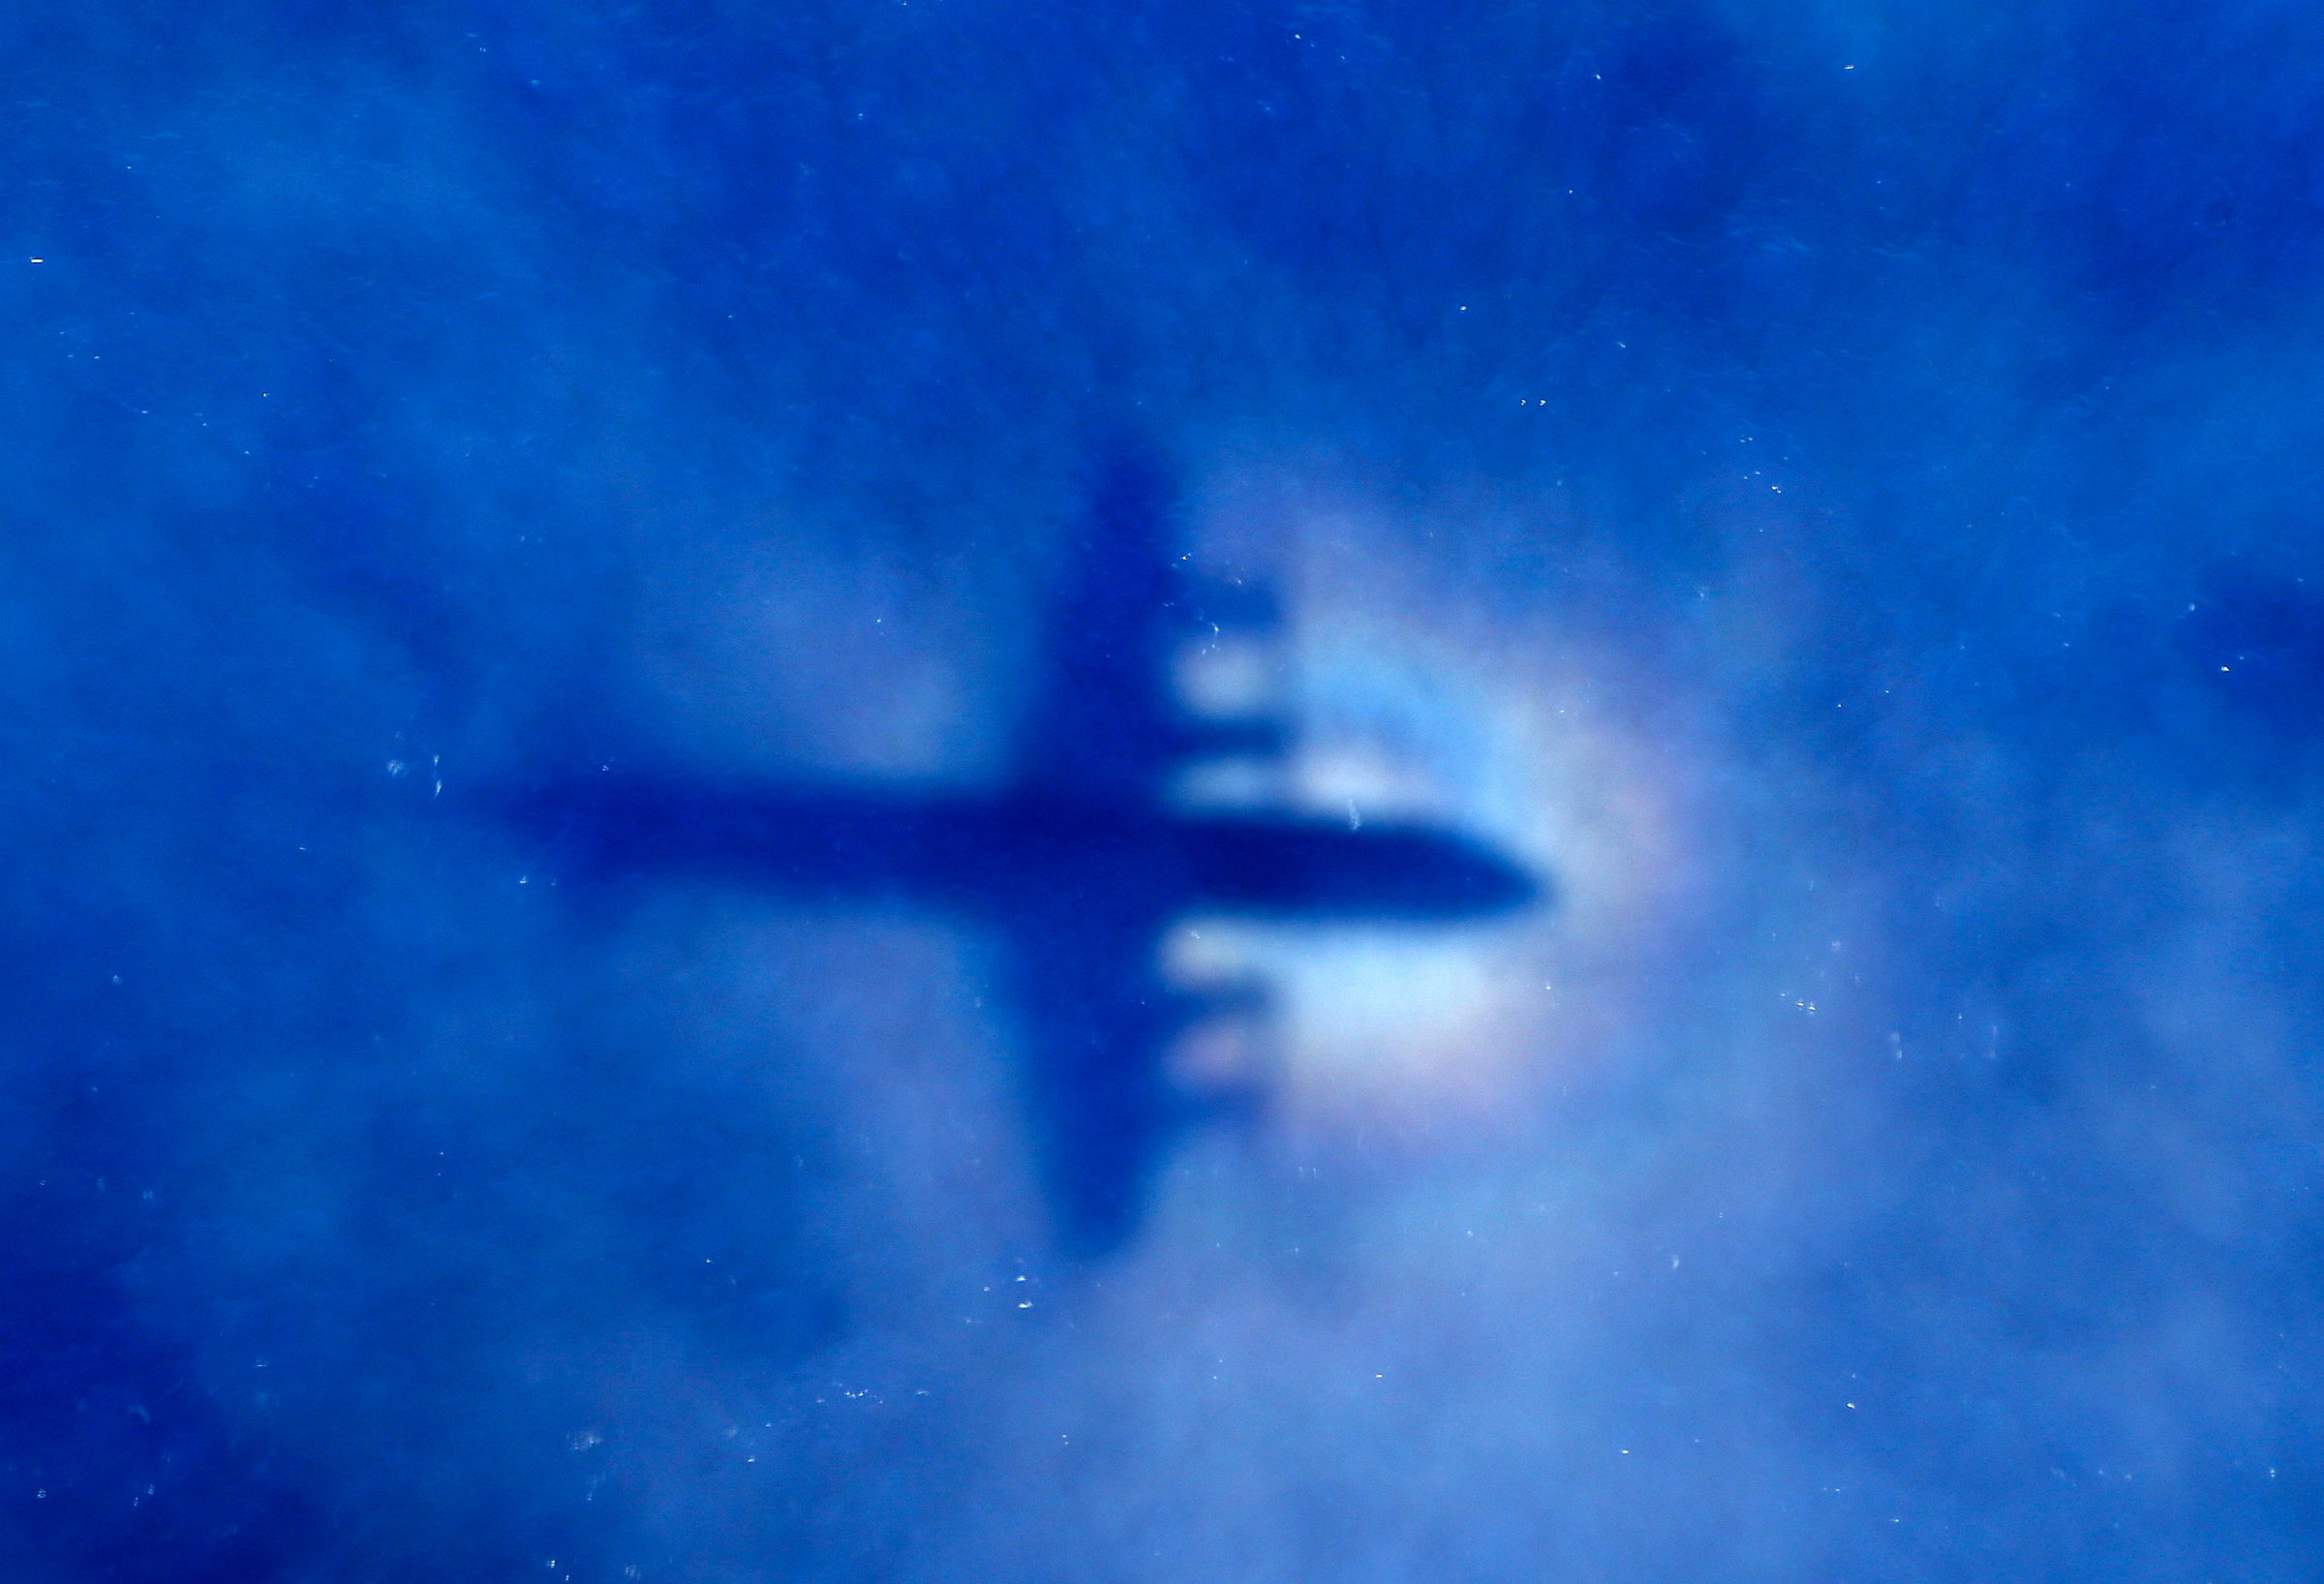 The shadow of a Royal New Zealand Air Force (RNZAF) P3 Orion maritime search aircraft can be seen on low-level clouds as it flies over the southern Indian Ocean looking for missing Malaysian Airlines flight MH370